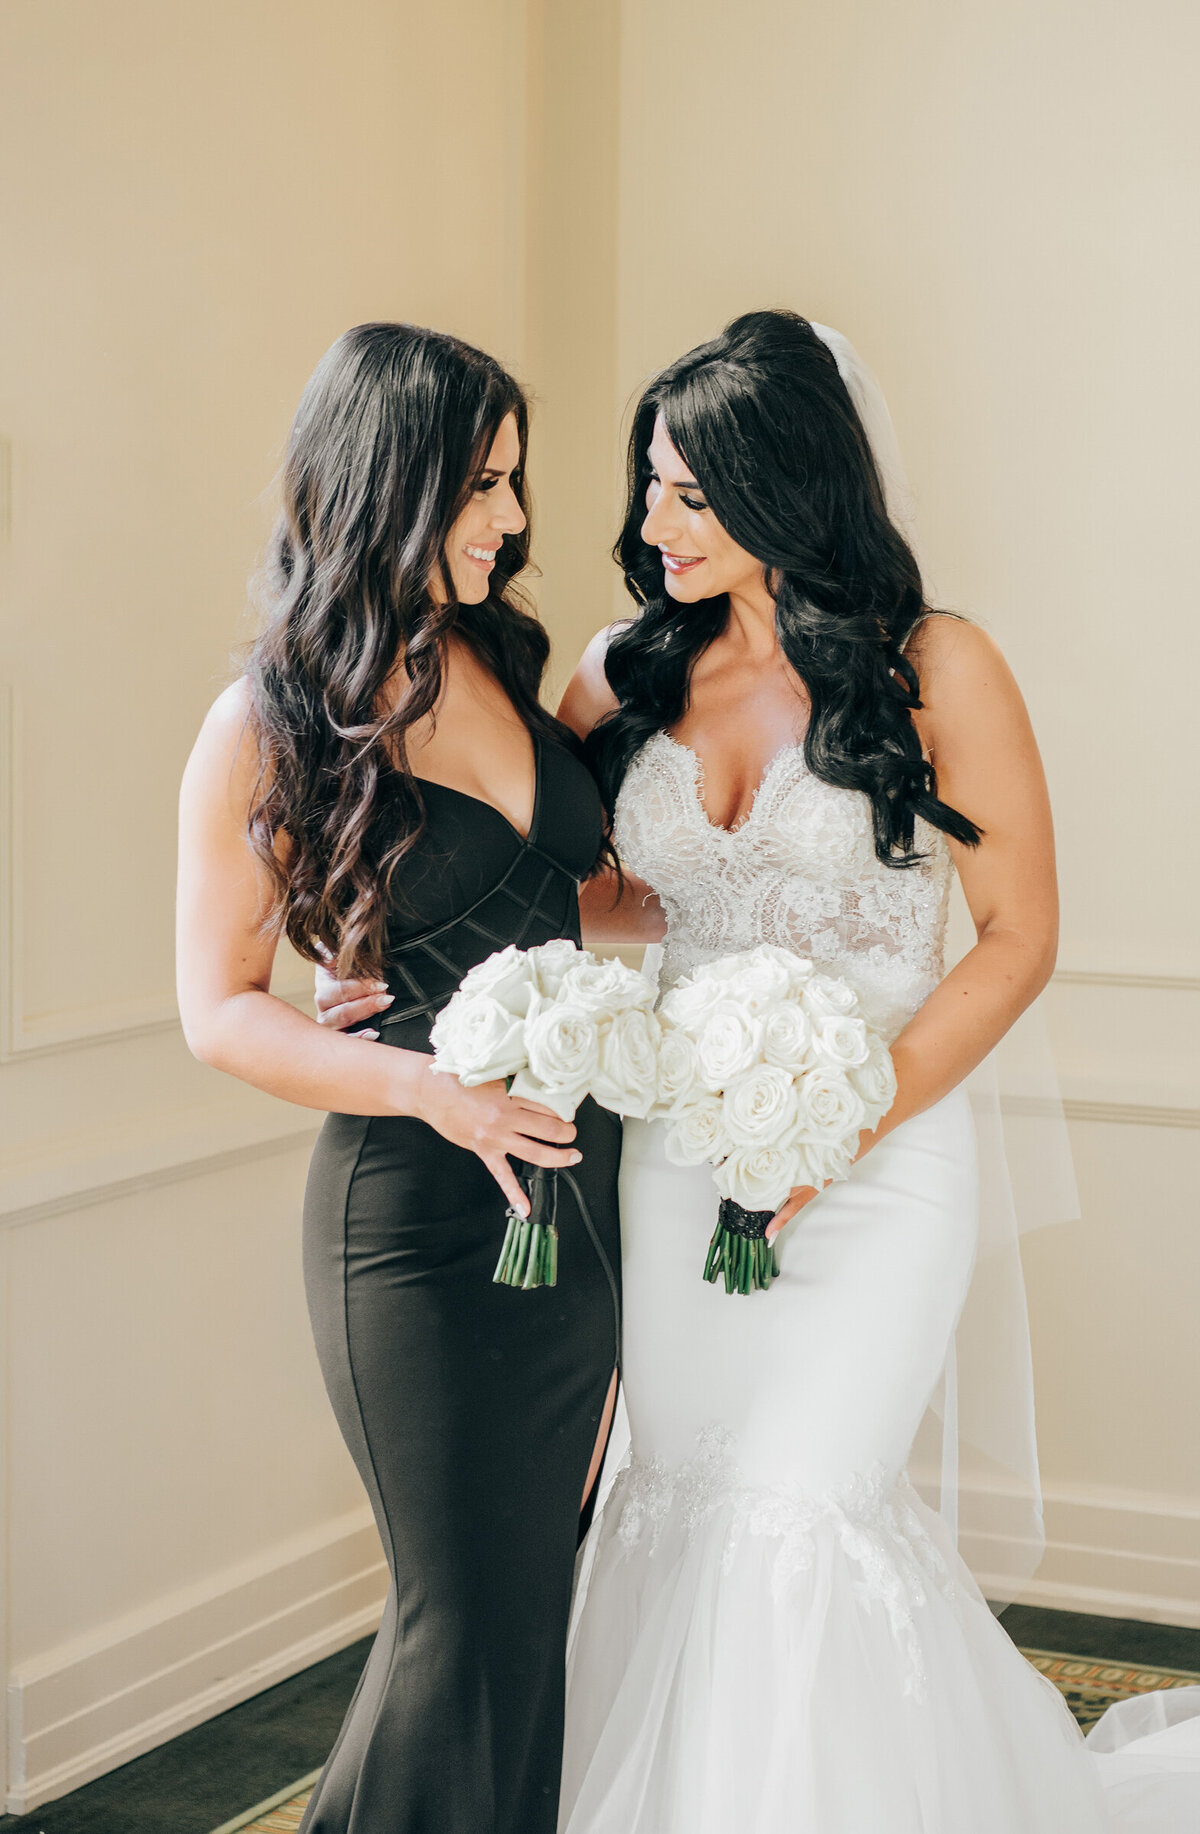 A bride and her maid of honour posing for photos before the wedding ceremony